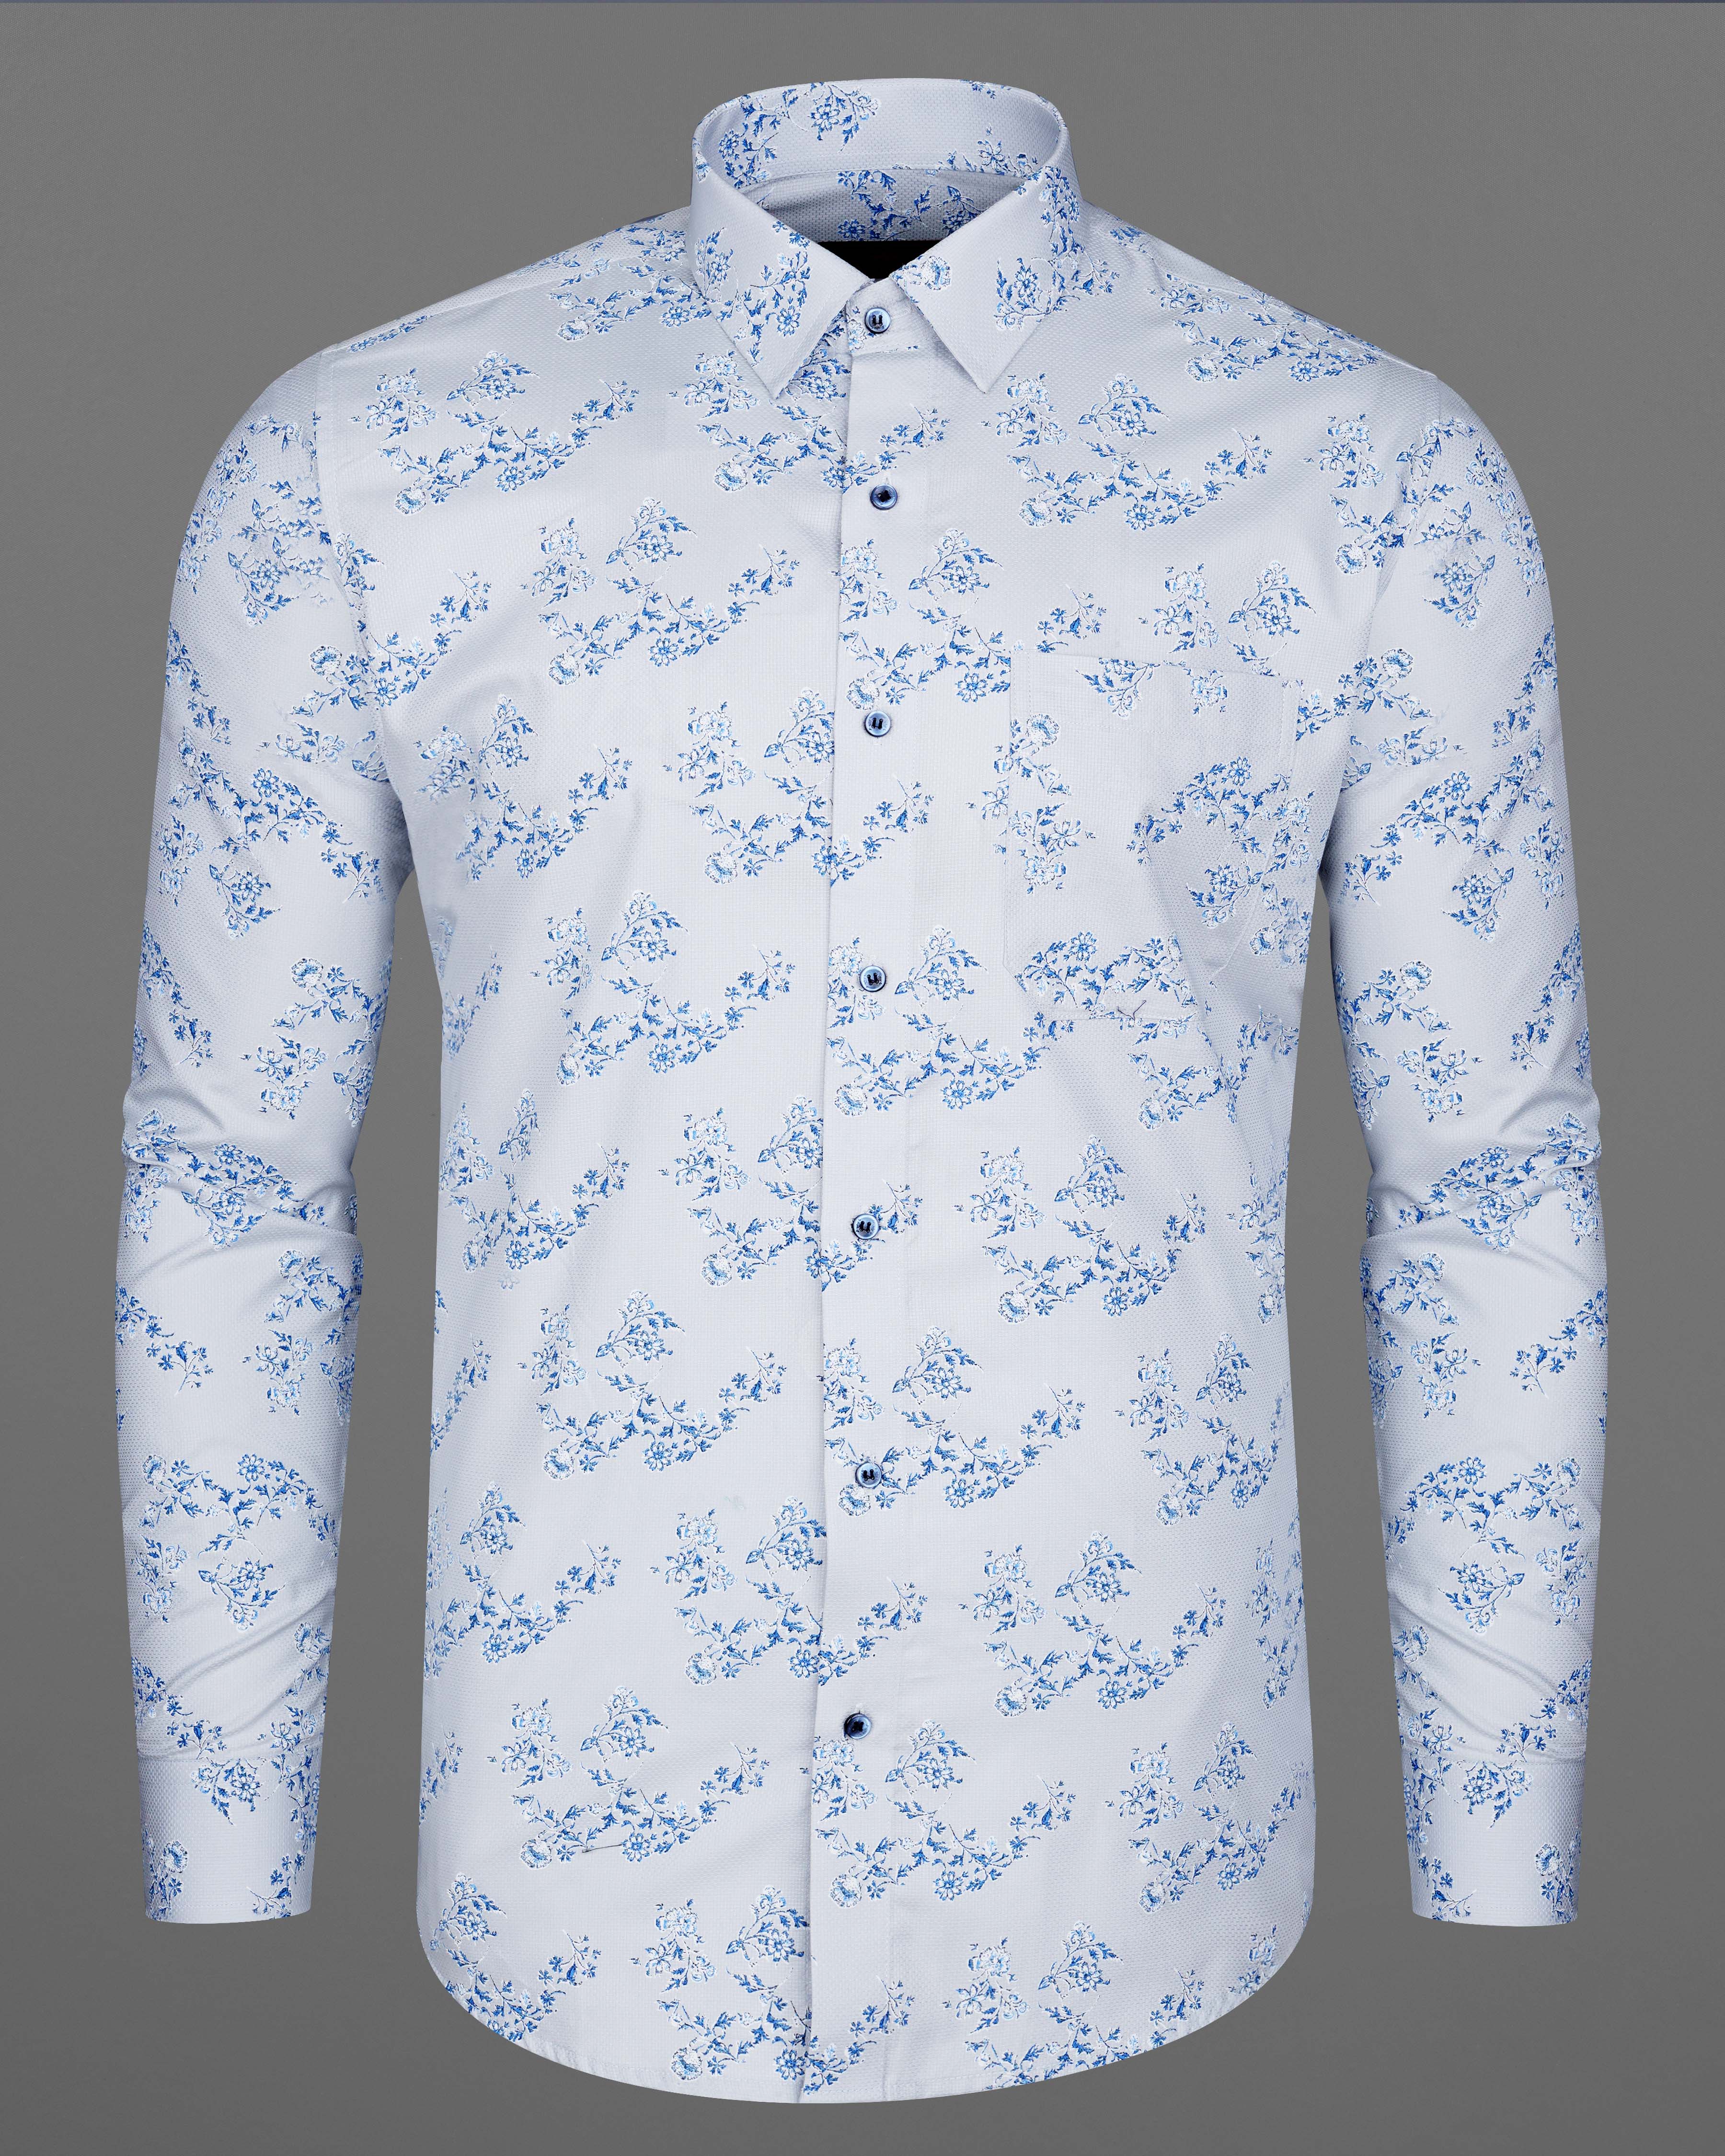 Zircon Grey and Celestial Blue Floral Print Dobby Textured Giza Cotton Shirt 8214-BLE -38,8214-BLE -H-38,8214-BLE -39,8214-BLE -H-39,8214-BLE -40,8214-BLE -H-40,8214-BLE -42,8214-BLE -H-42,8214-BLE -44,8214-BLE -H-44,8214-BLE -46,8214-BLE -H-46,8214-BLE -48,8214-BLE -H-48,8214-BLE -50,8214-BLE -H-50,8214-BLE -52,8214-BLE -H-52